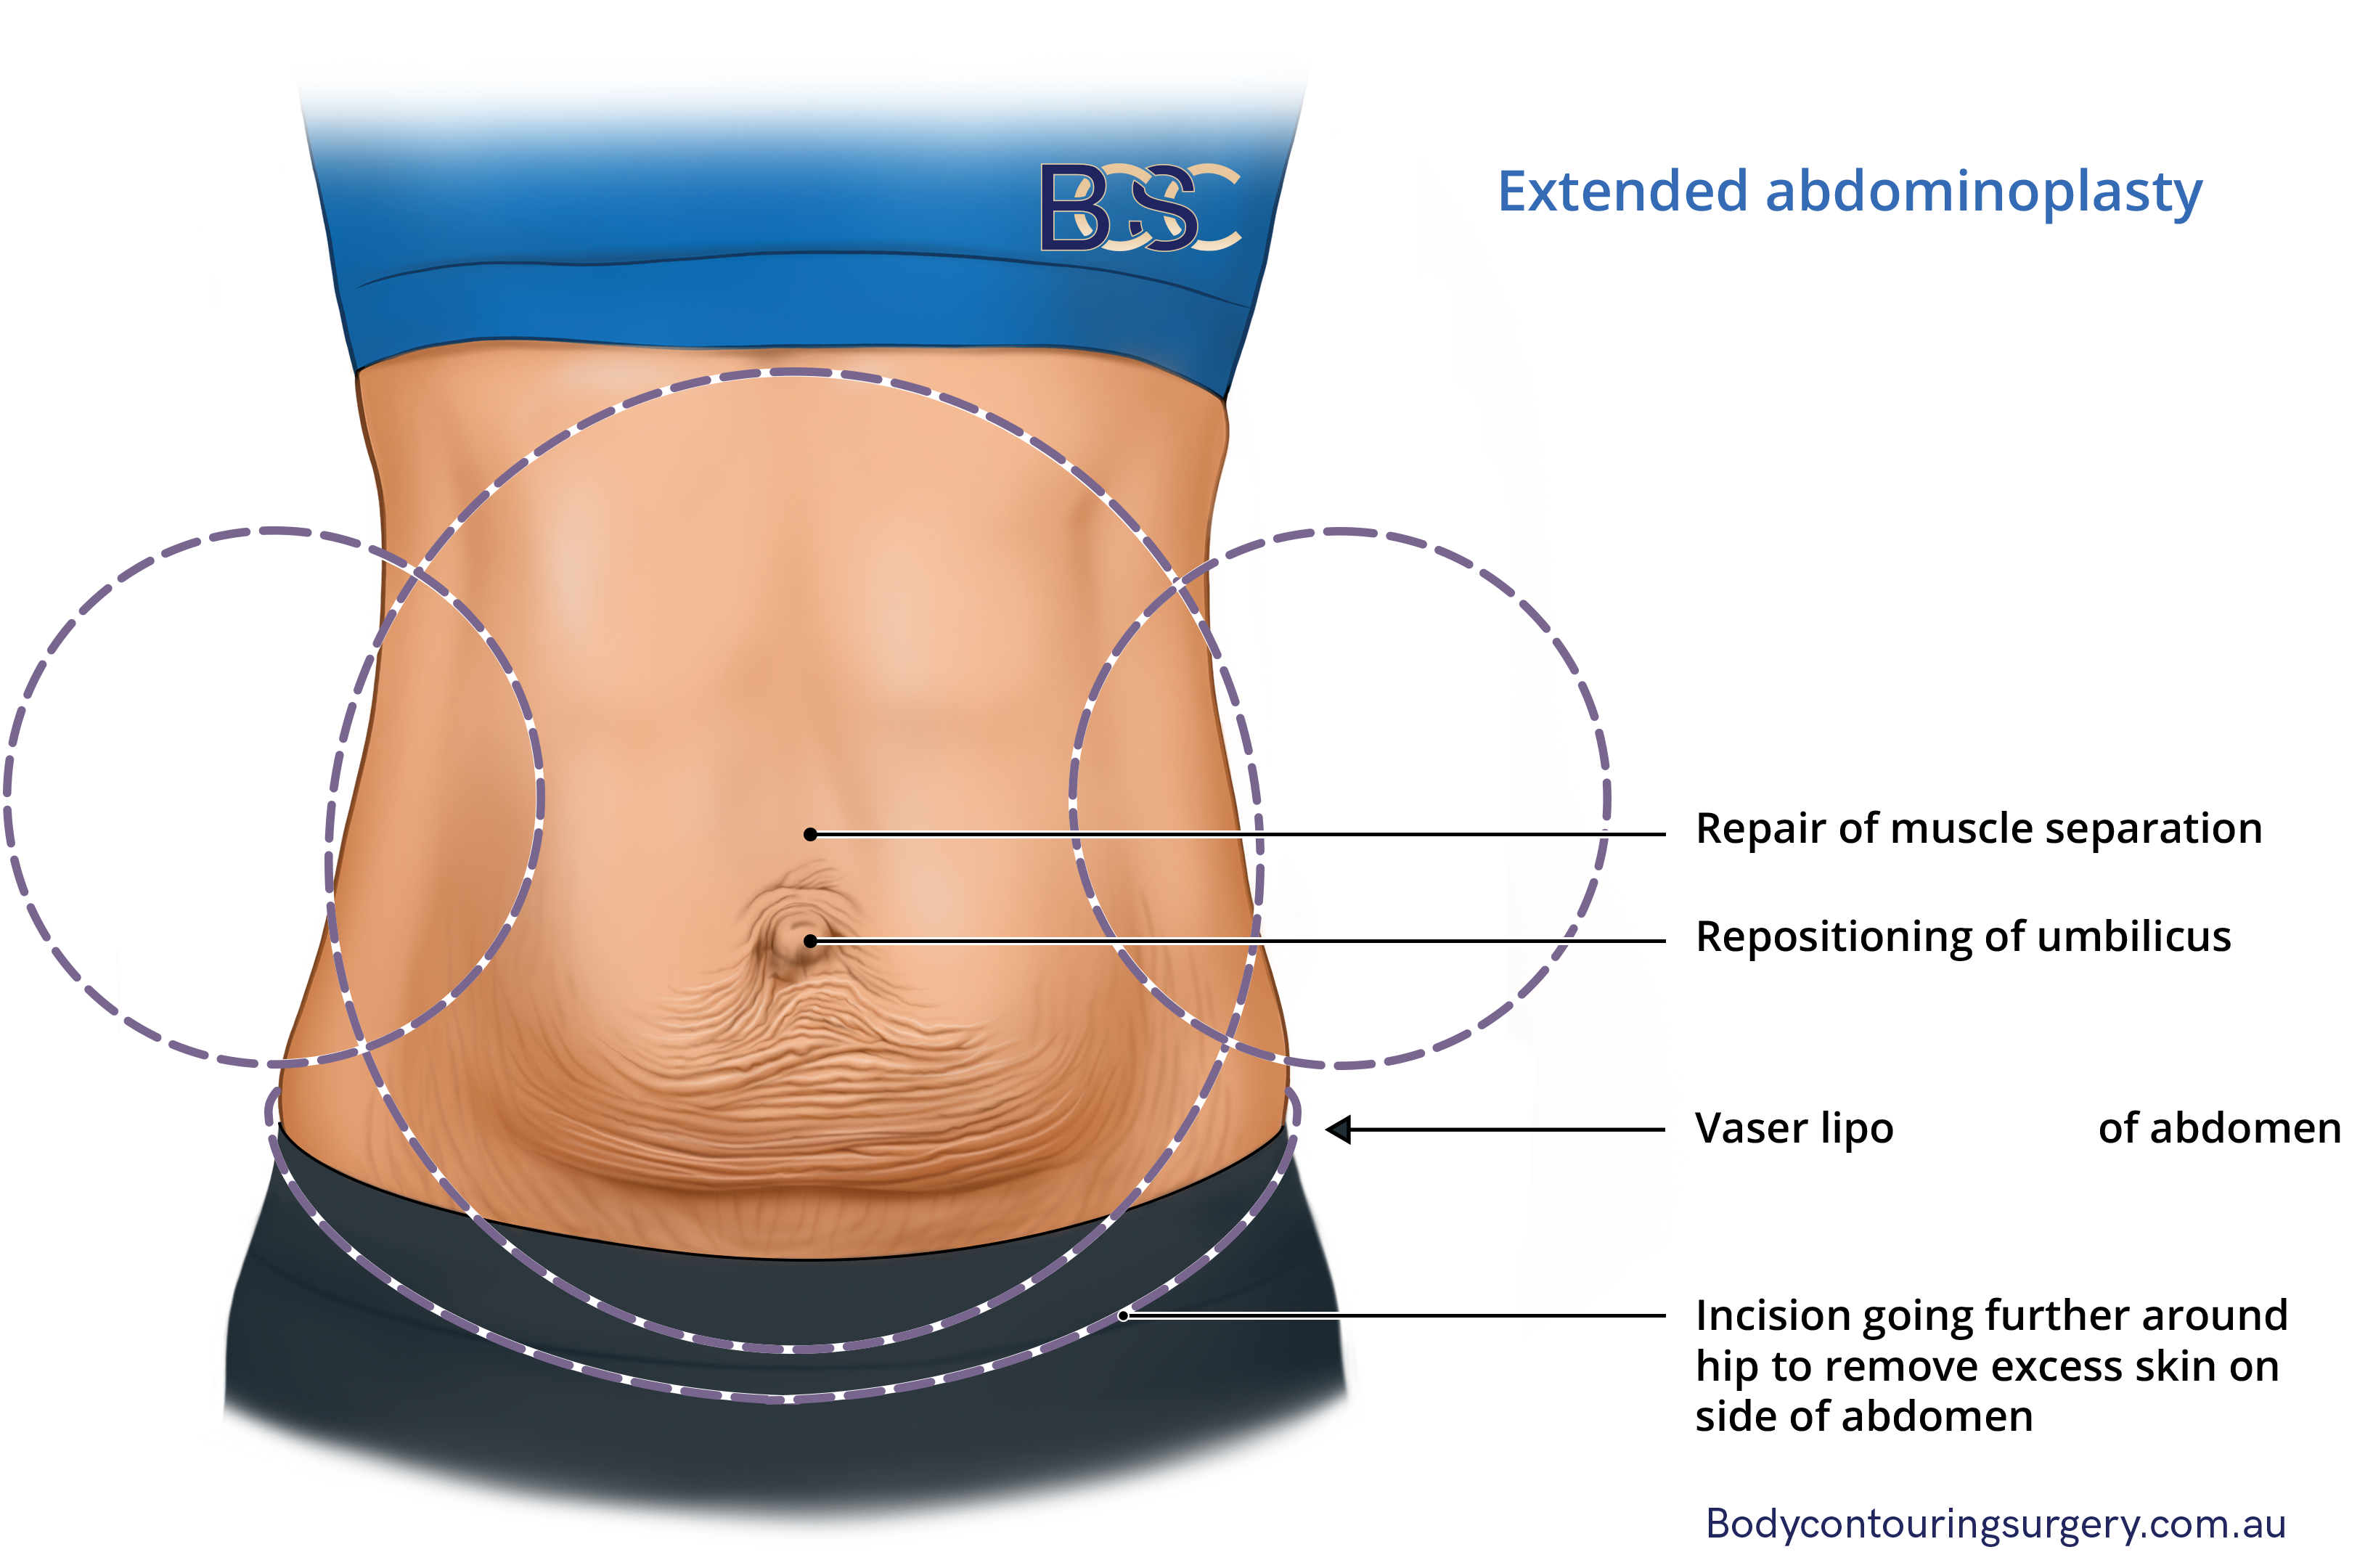 extended tummy tuck removes significant amount of skin after weight loss surgery